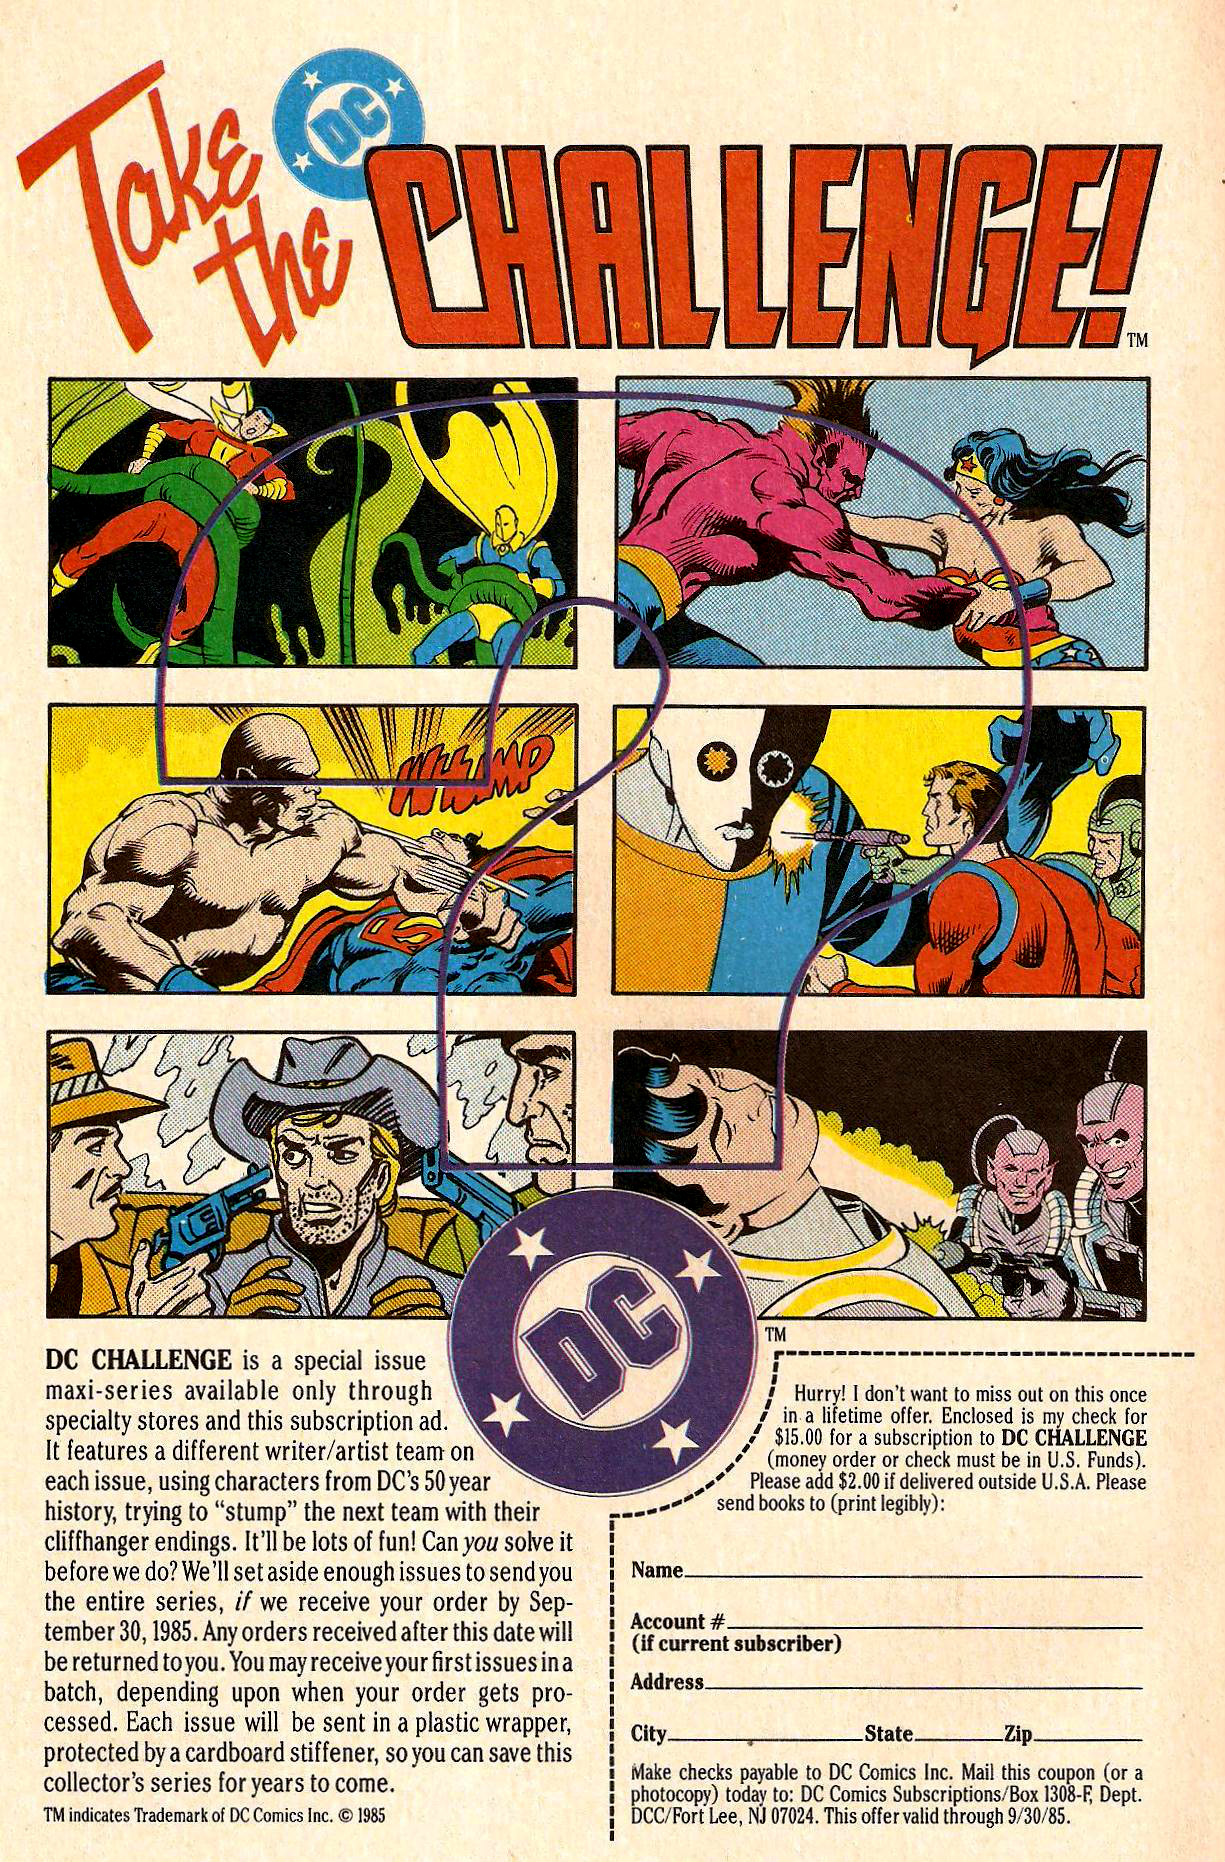 DC Challenge In-House Ad (1985)